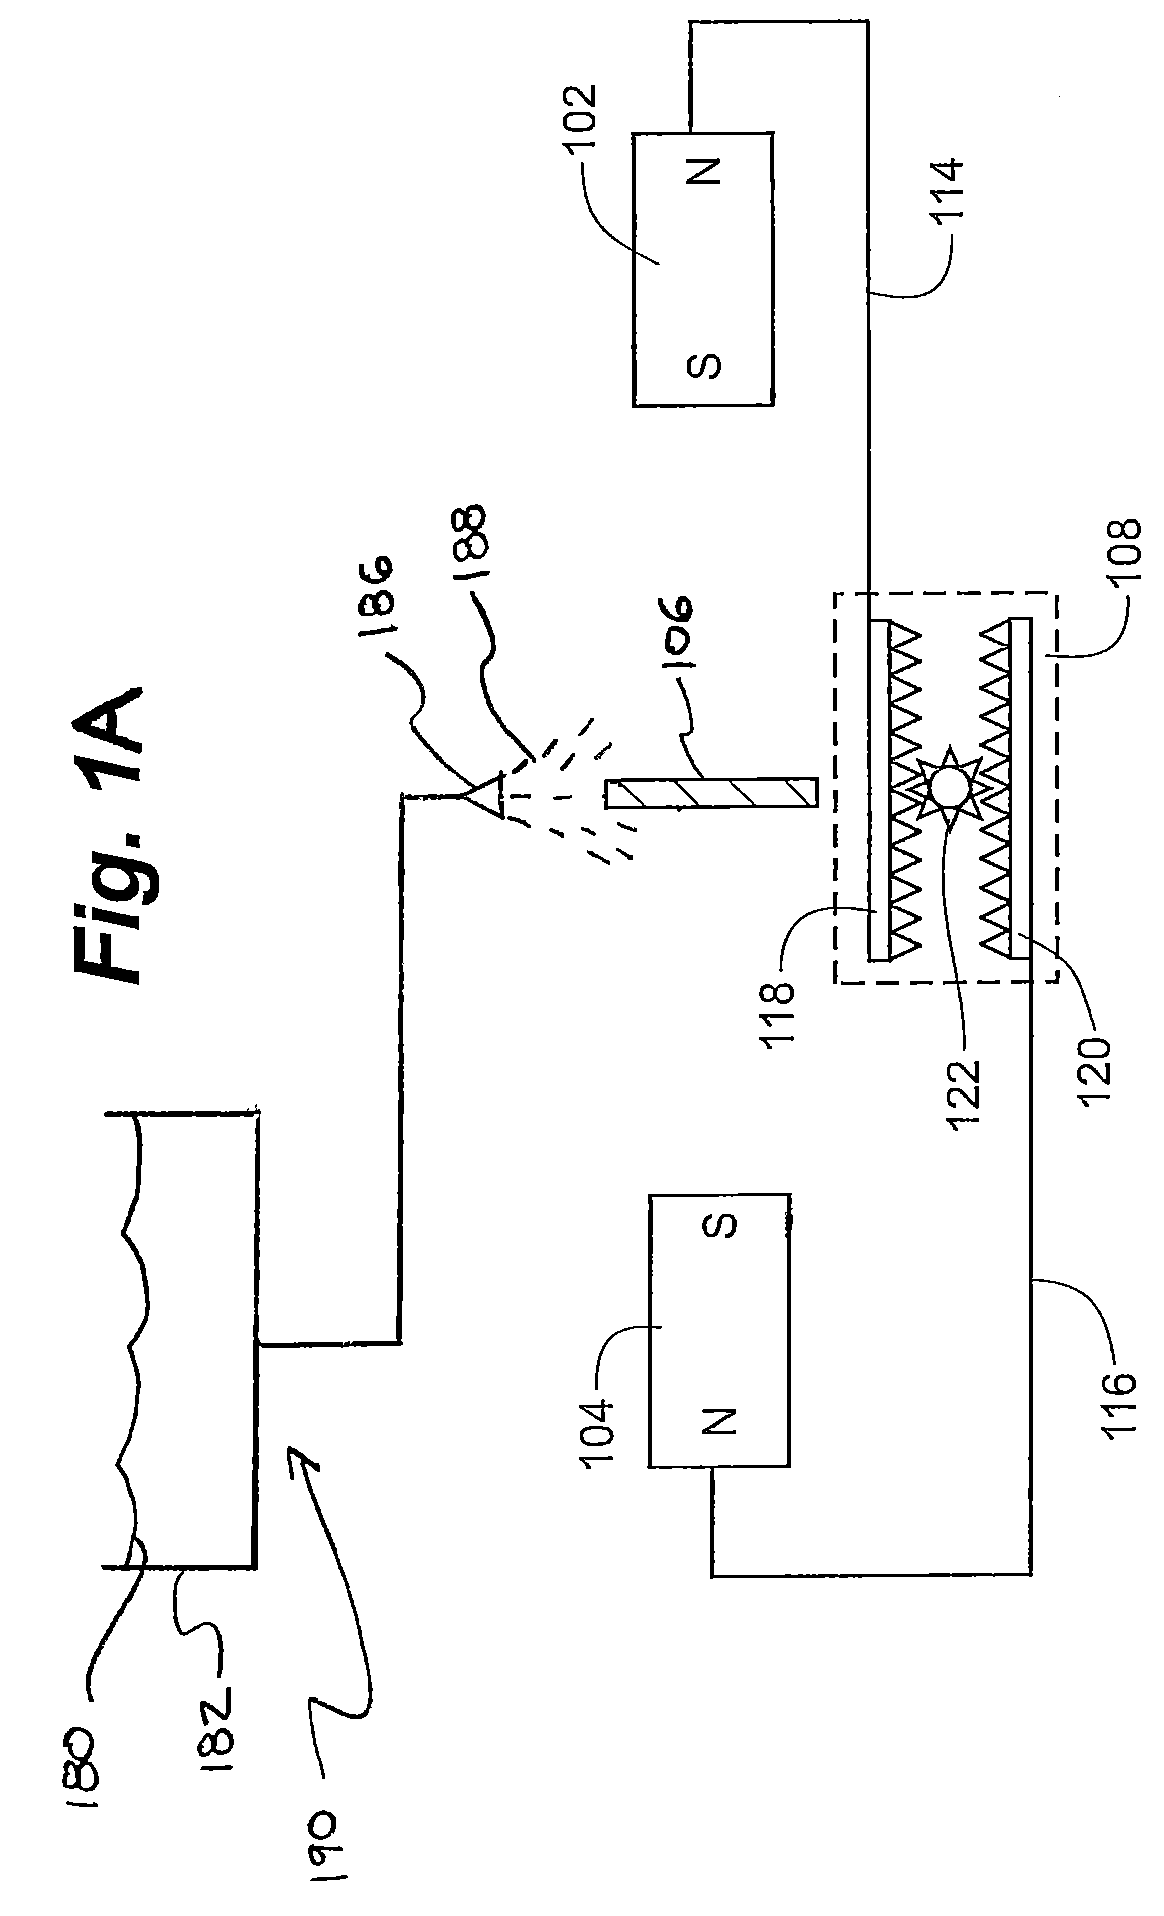 Apparatus and method for producing mechanical work